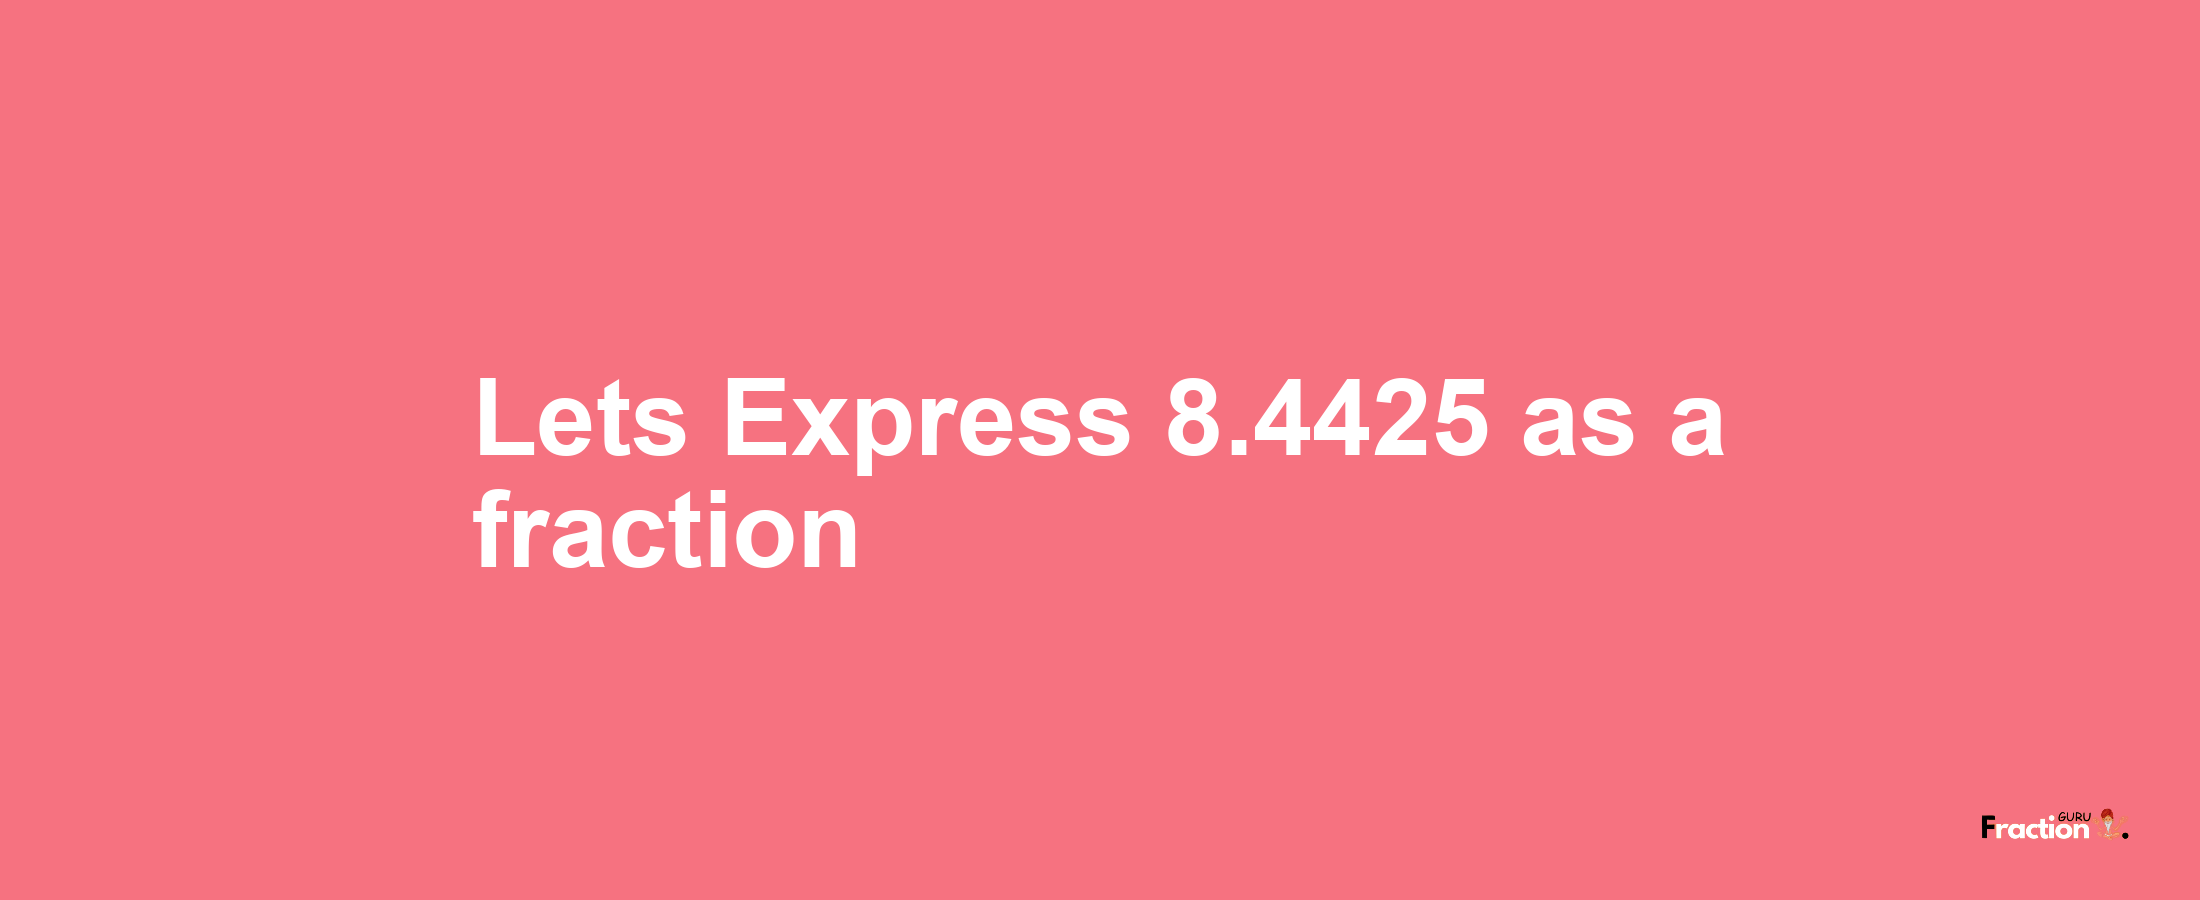 Lets Express 8.4425 as afraction